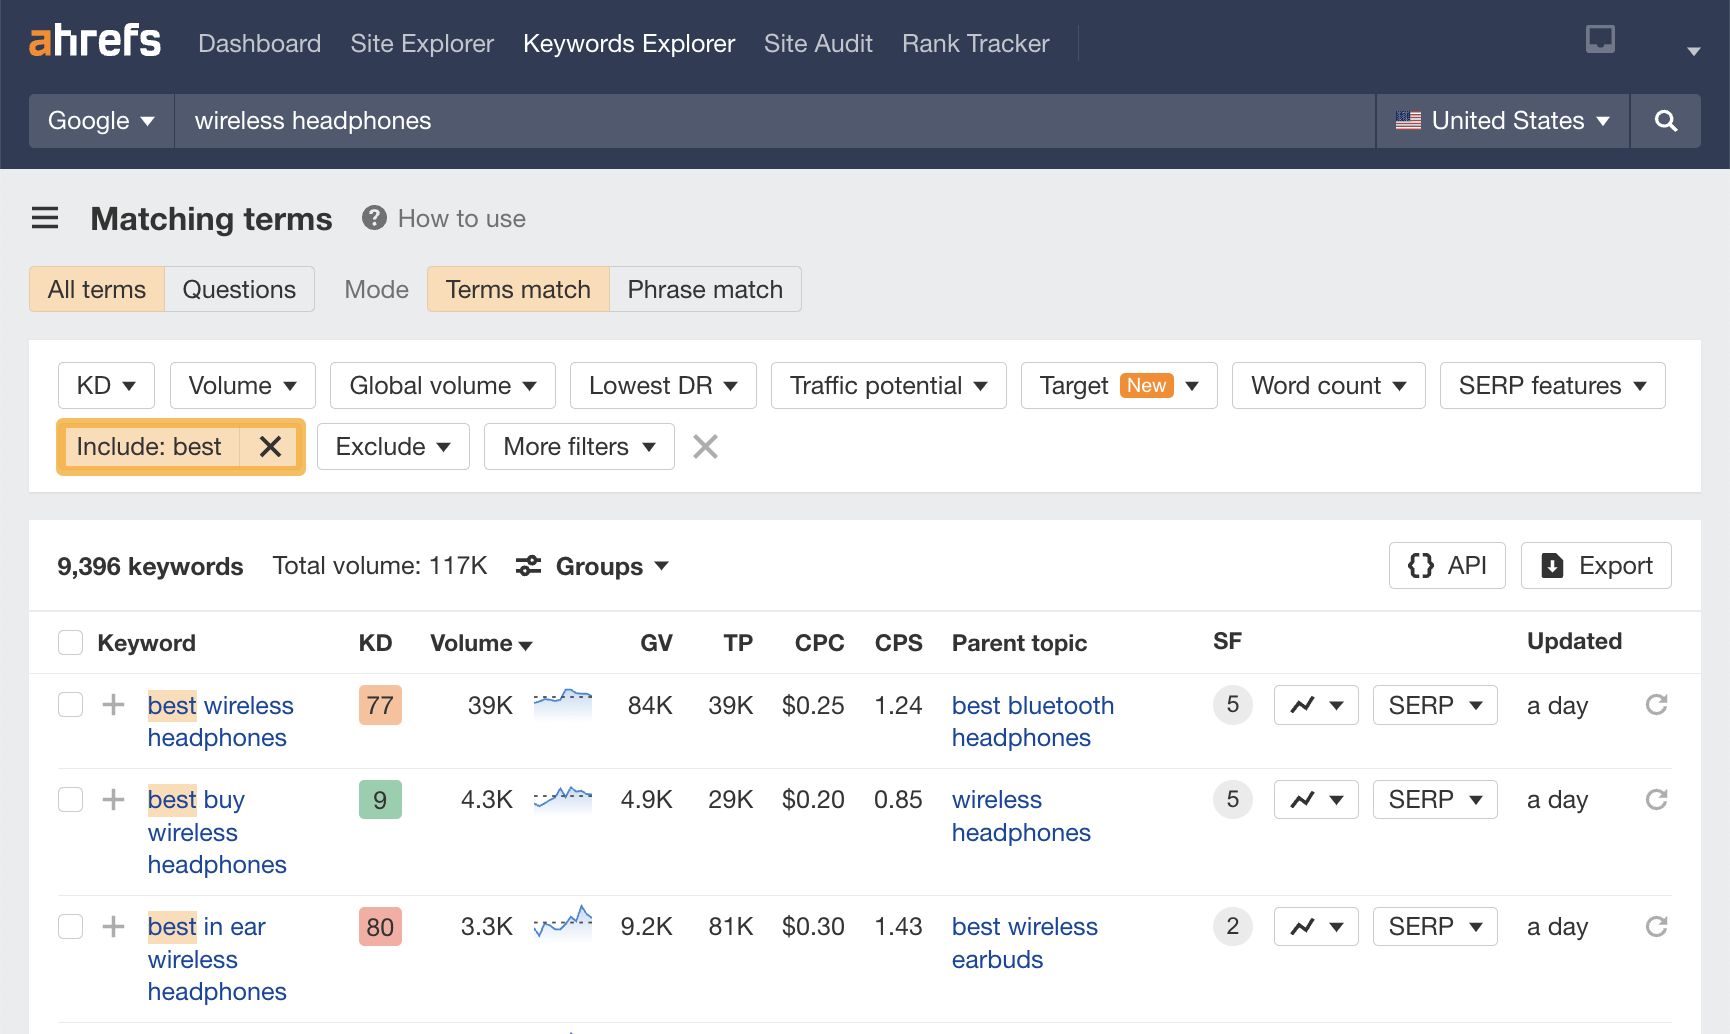 Finding commercial intent keywords using the "Include" filter in Ahrefs' Keywords Explorer